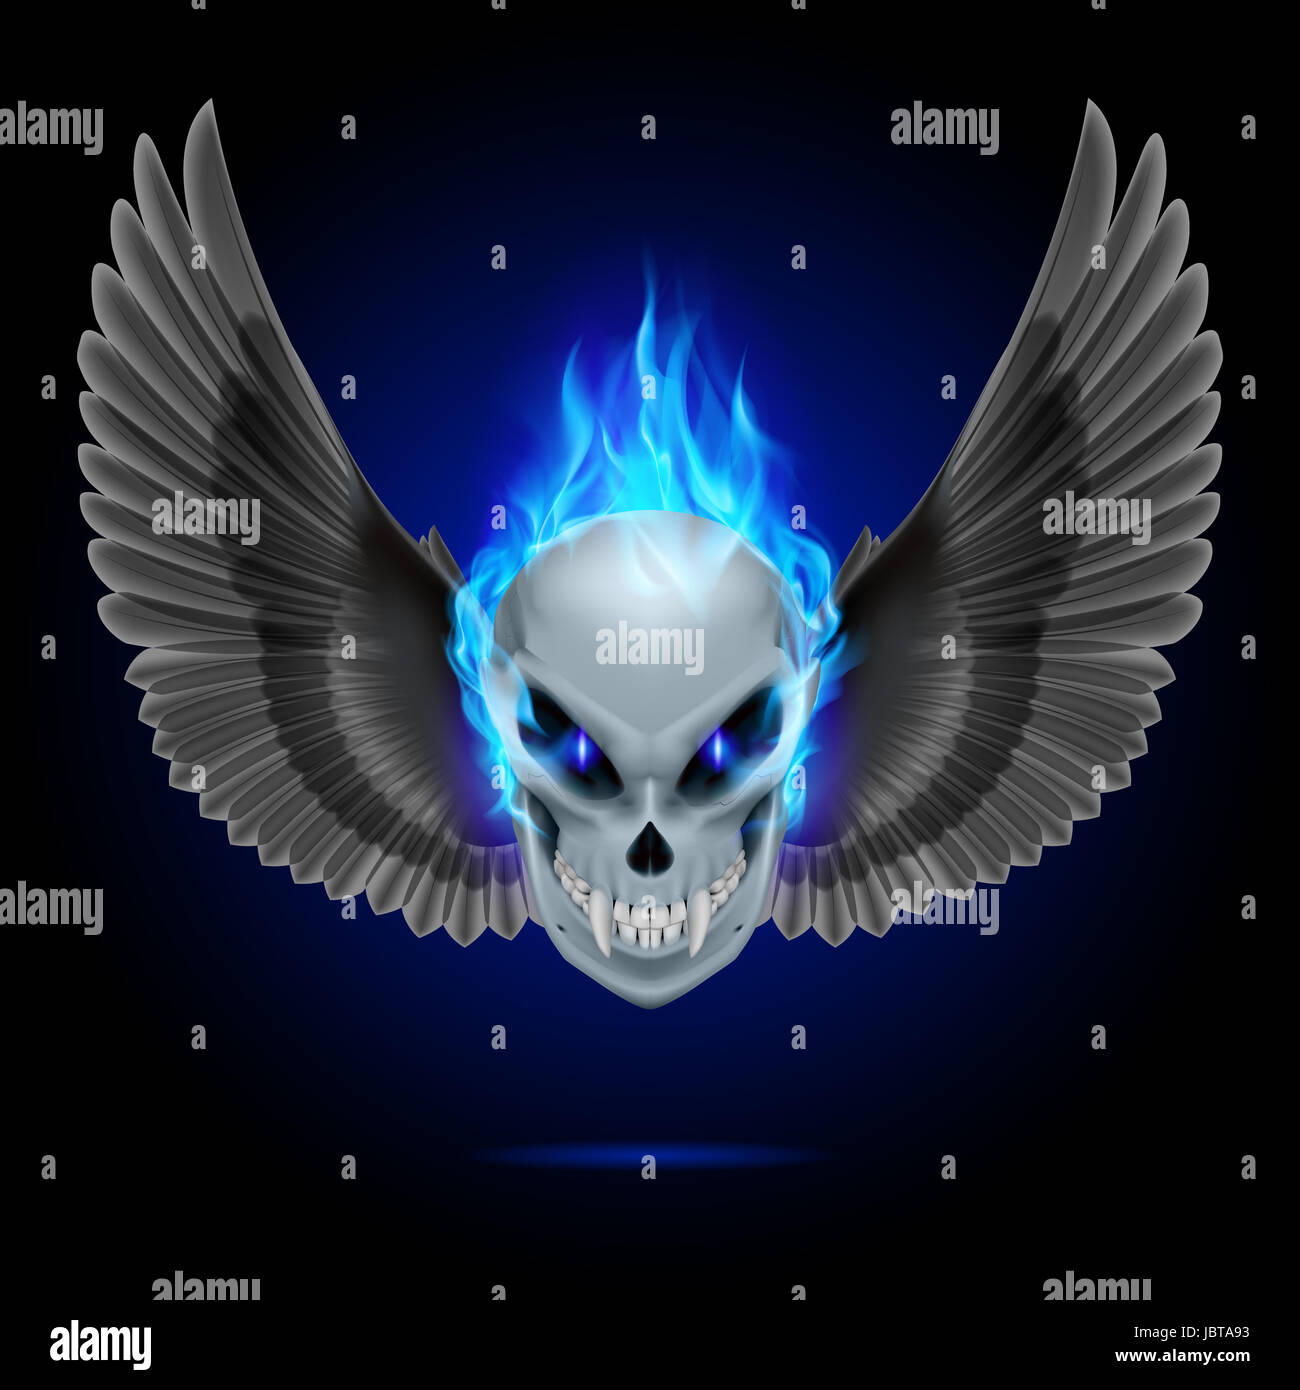 Mutant skull with long fangs, blue flame and black wings Stock Photo